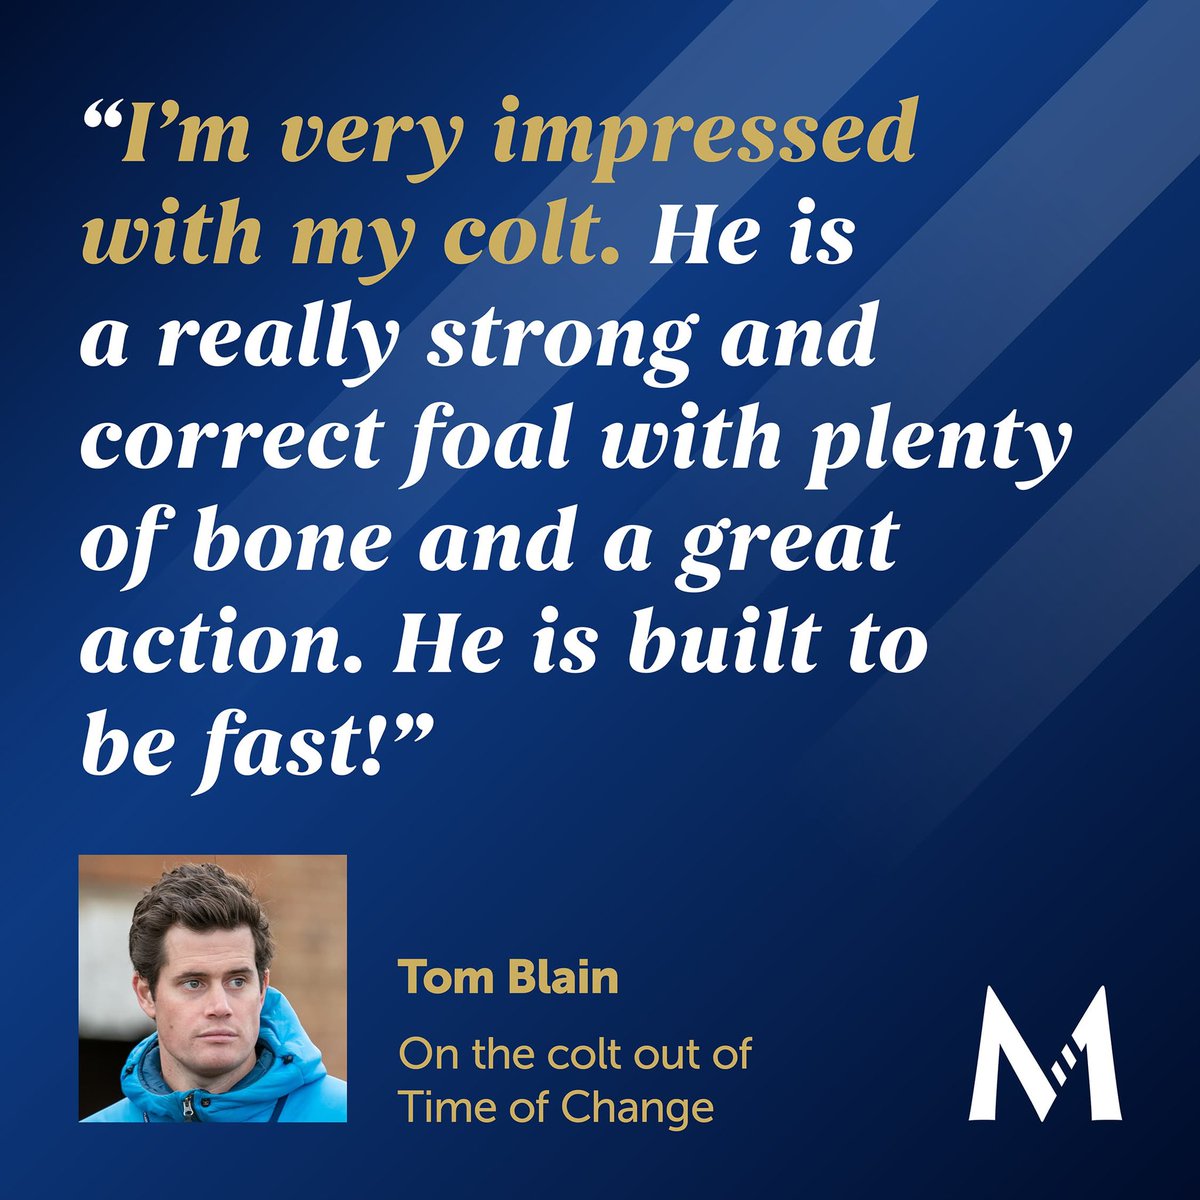 𝐌𝐨𝐫𝐞 𝐫𝐚𝐯𝐞 𝐫𝐞𝐯𝐢𝐞𝐰𝐬 𝐟𝐨𝐫 #MINZAAL’𝐬 𝐟𝐢𝐫𝐬𝐭 𝐟𝐨𝐚𝐥𝐬! 🔥 See what Tom Blain has to say on his colt out of Time of Change…👇🔵⚪️